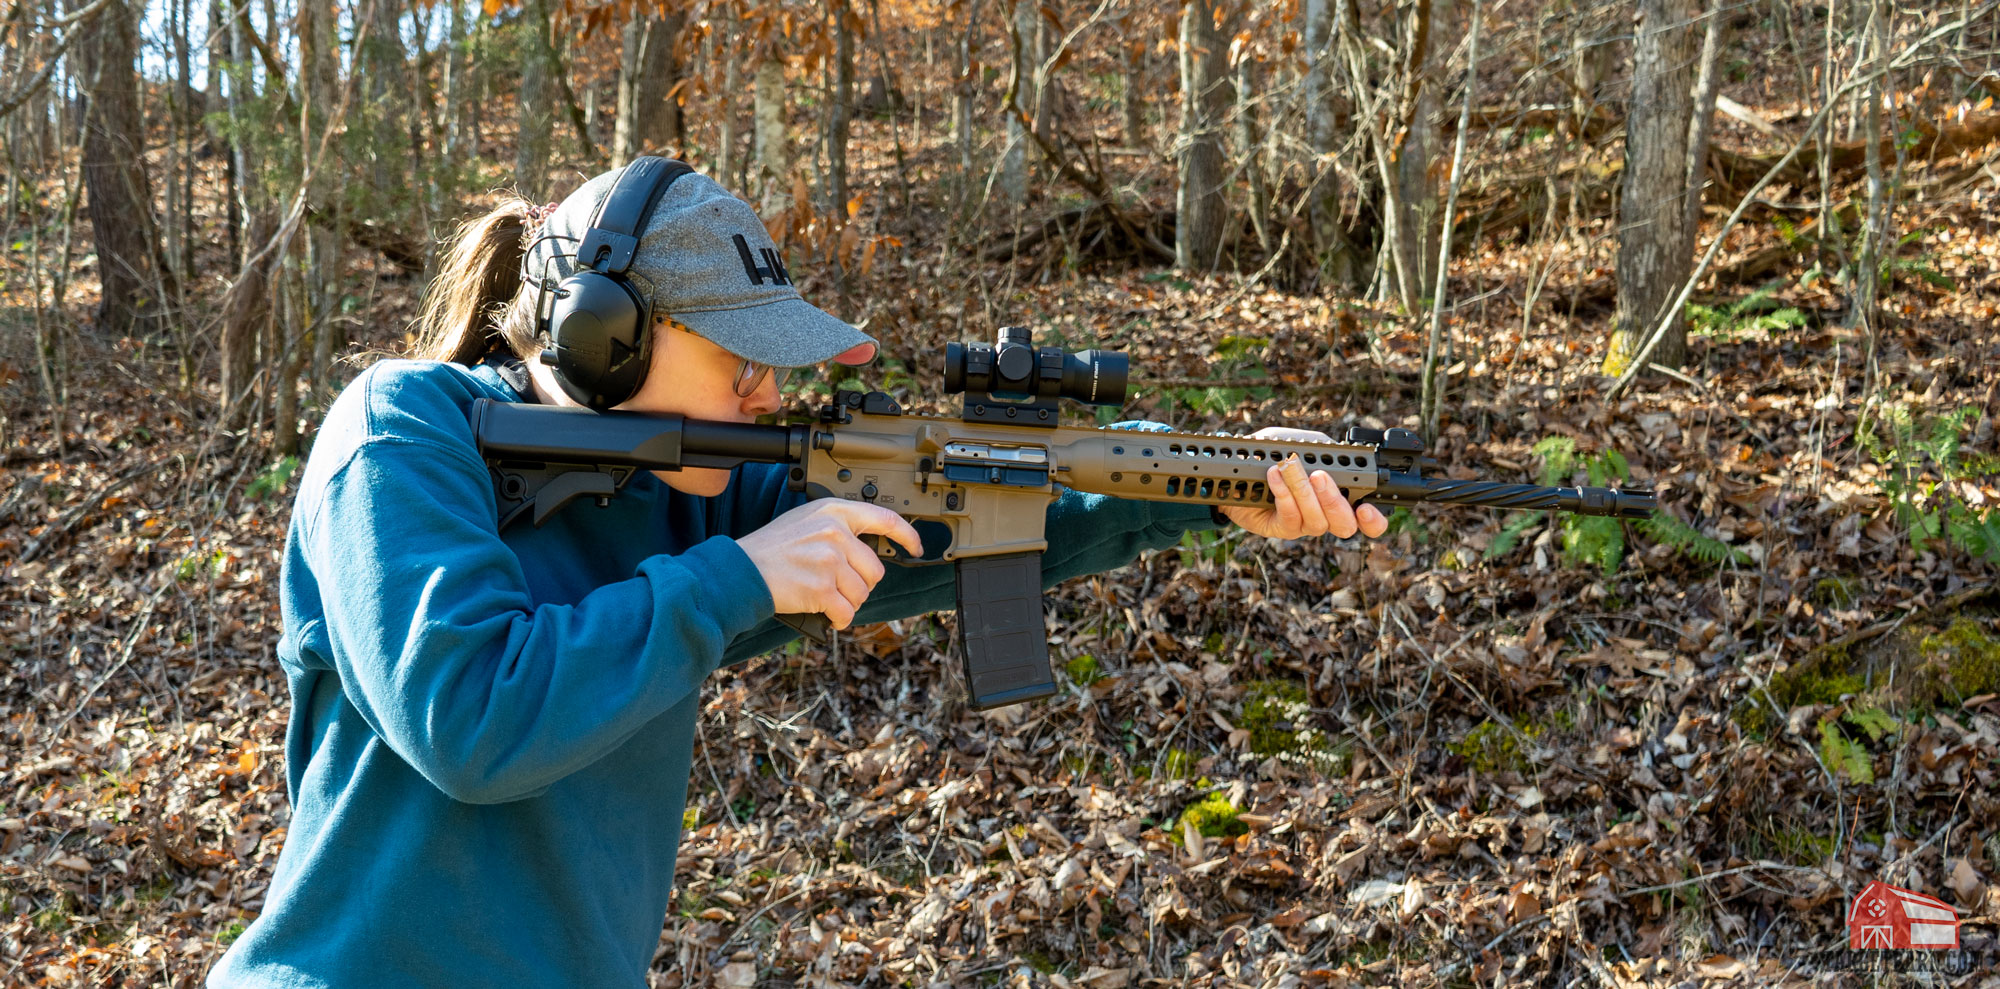 mckenzie shooting an ar-15 with a leupold red dot sight